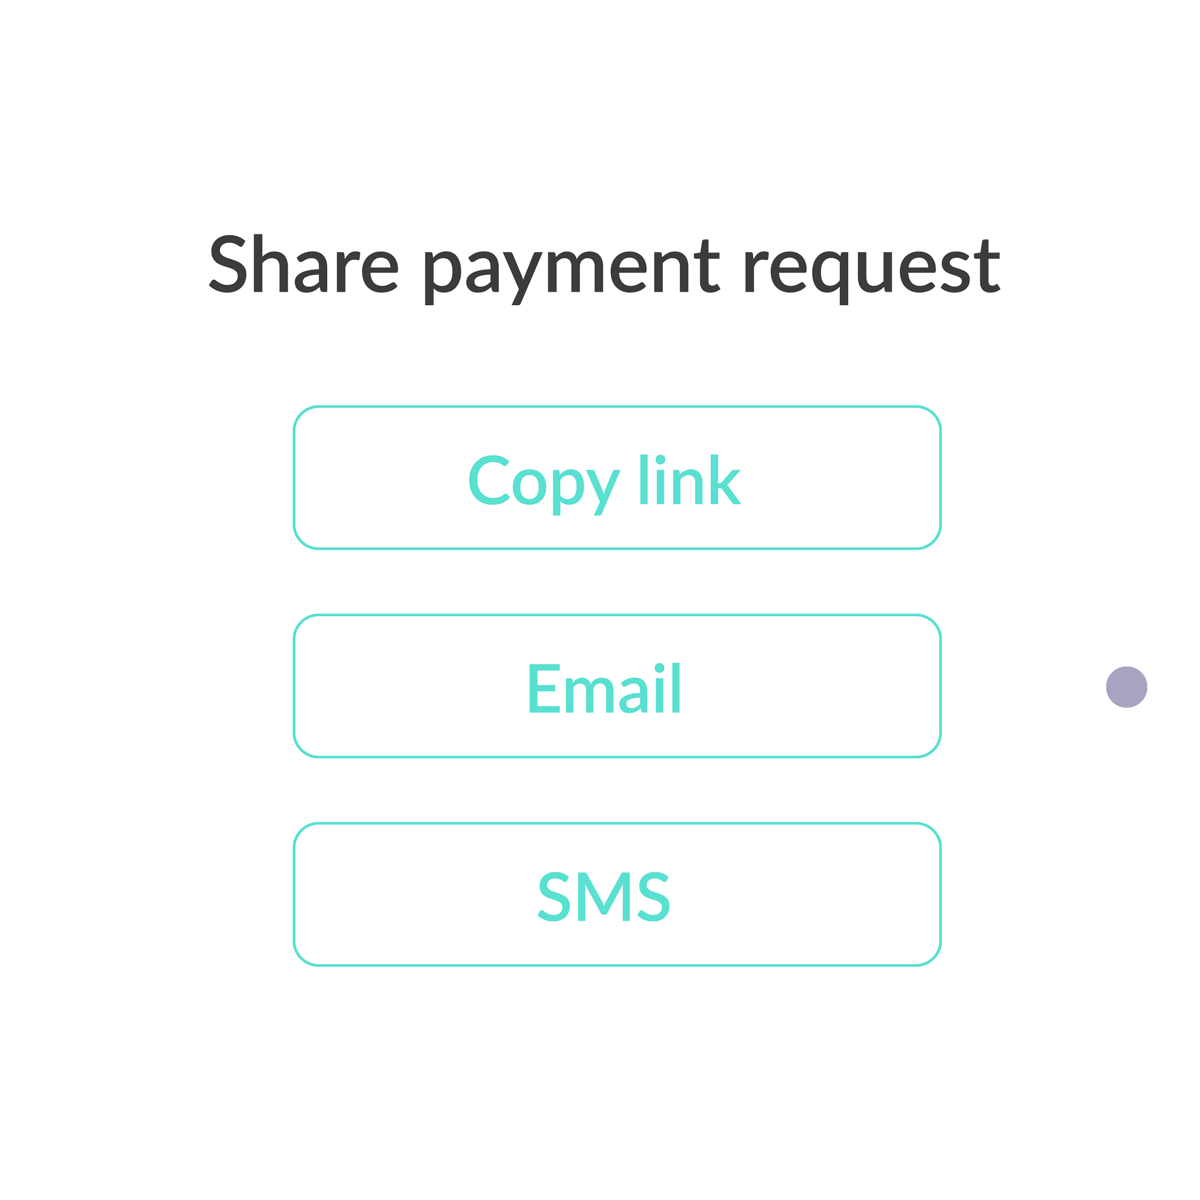 Choose to share payment request via link, email or SMS